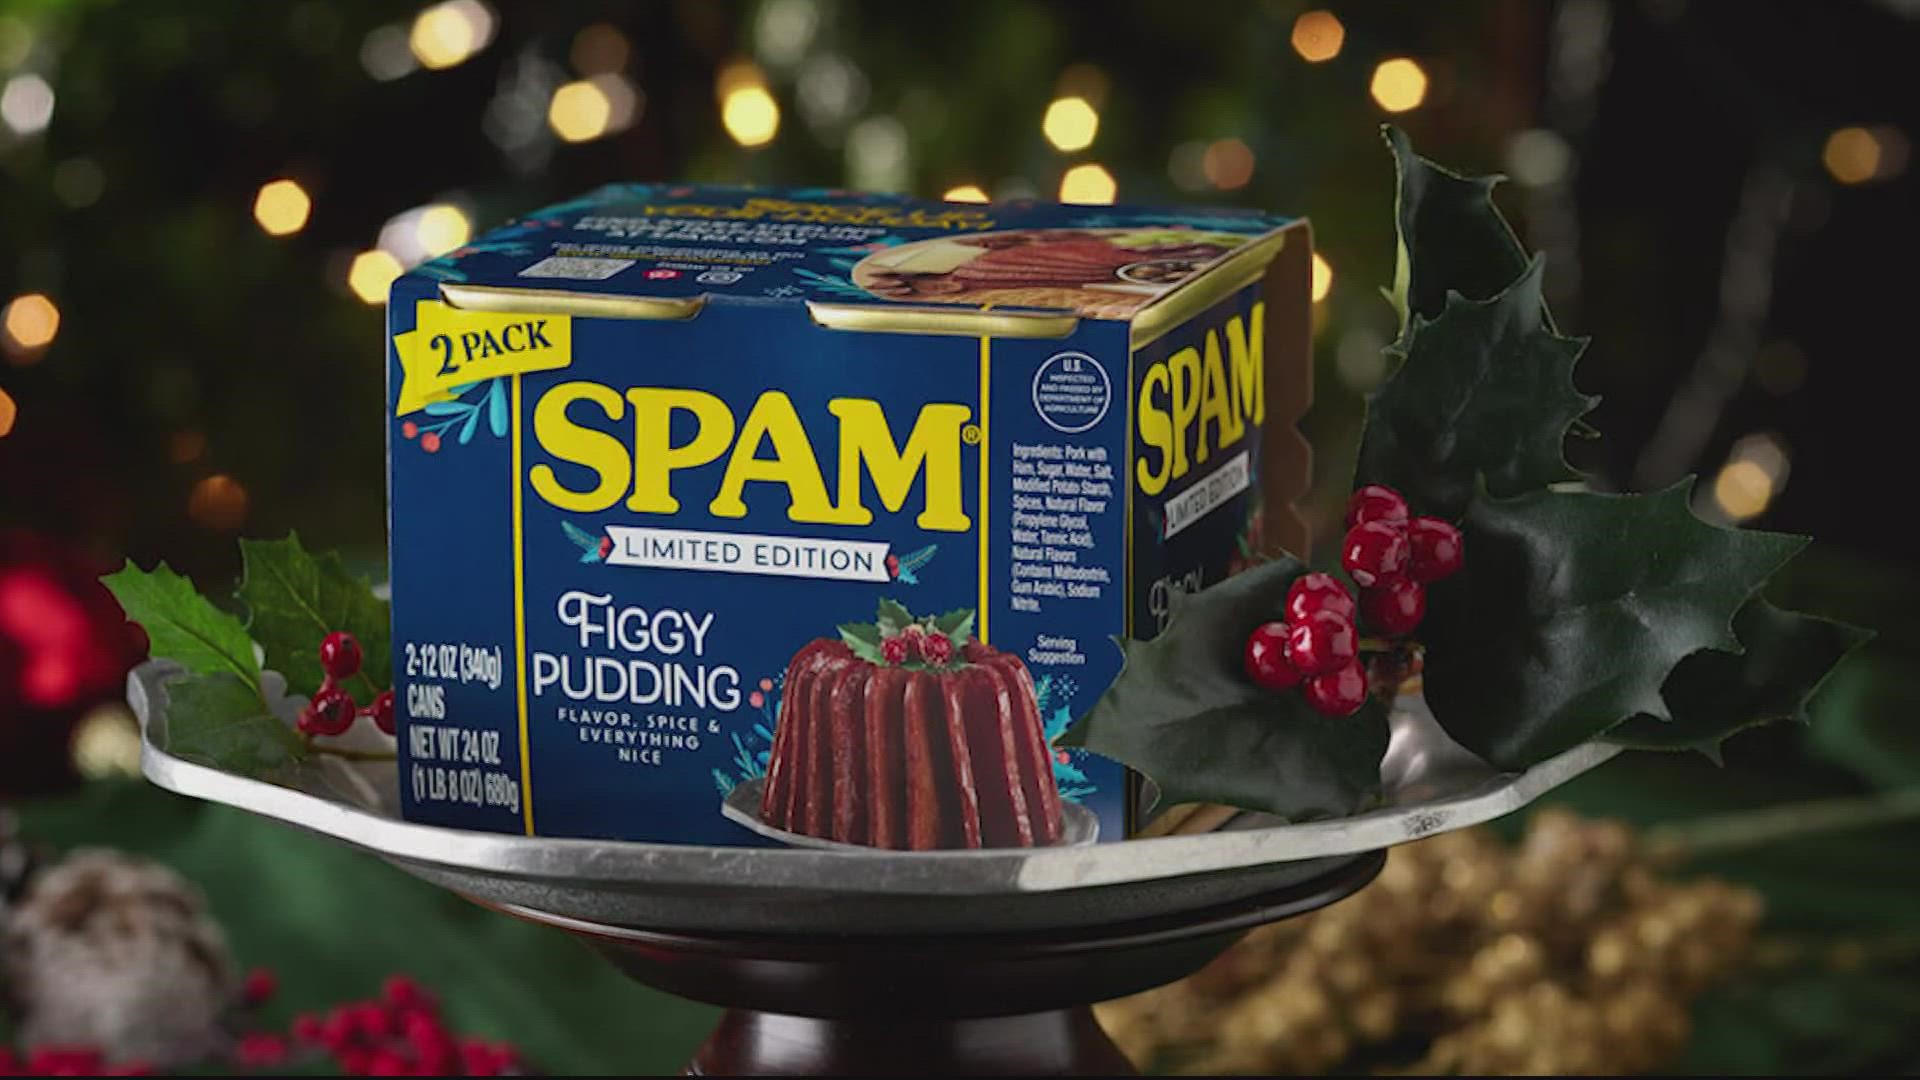 This holiday season, you'll be able to offer guests something extra unique to eat. Spam officially launched its limited edition Figgy Pudding.